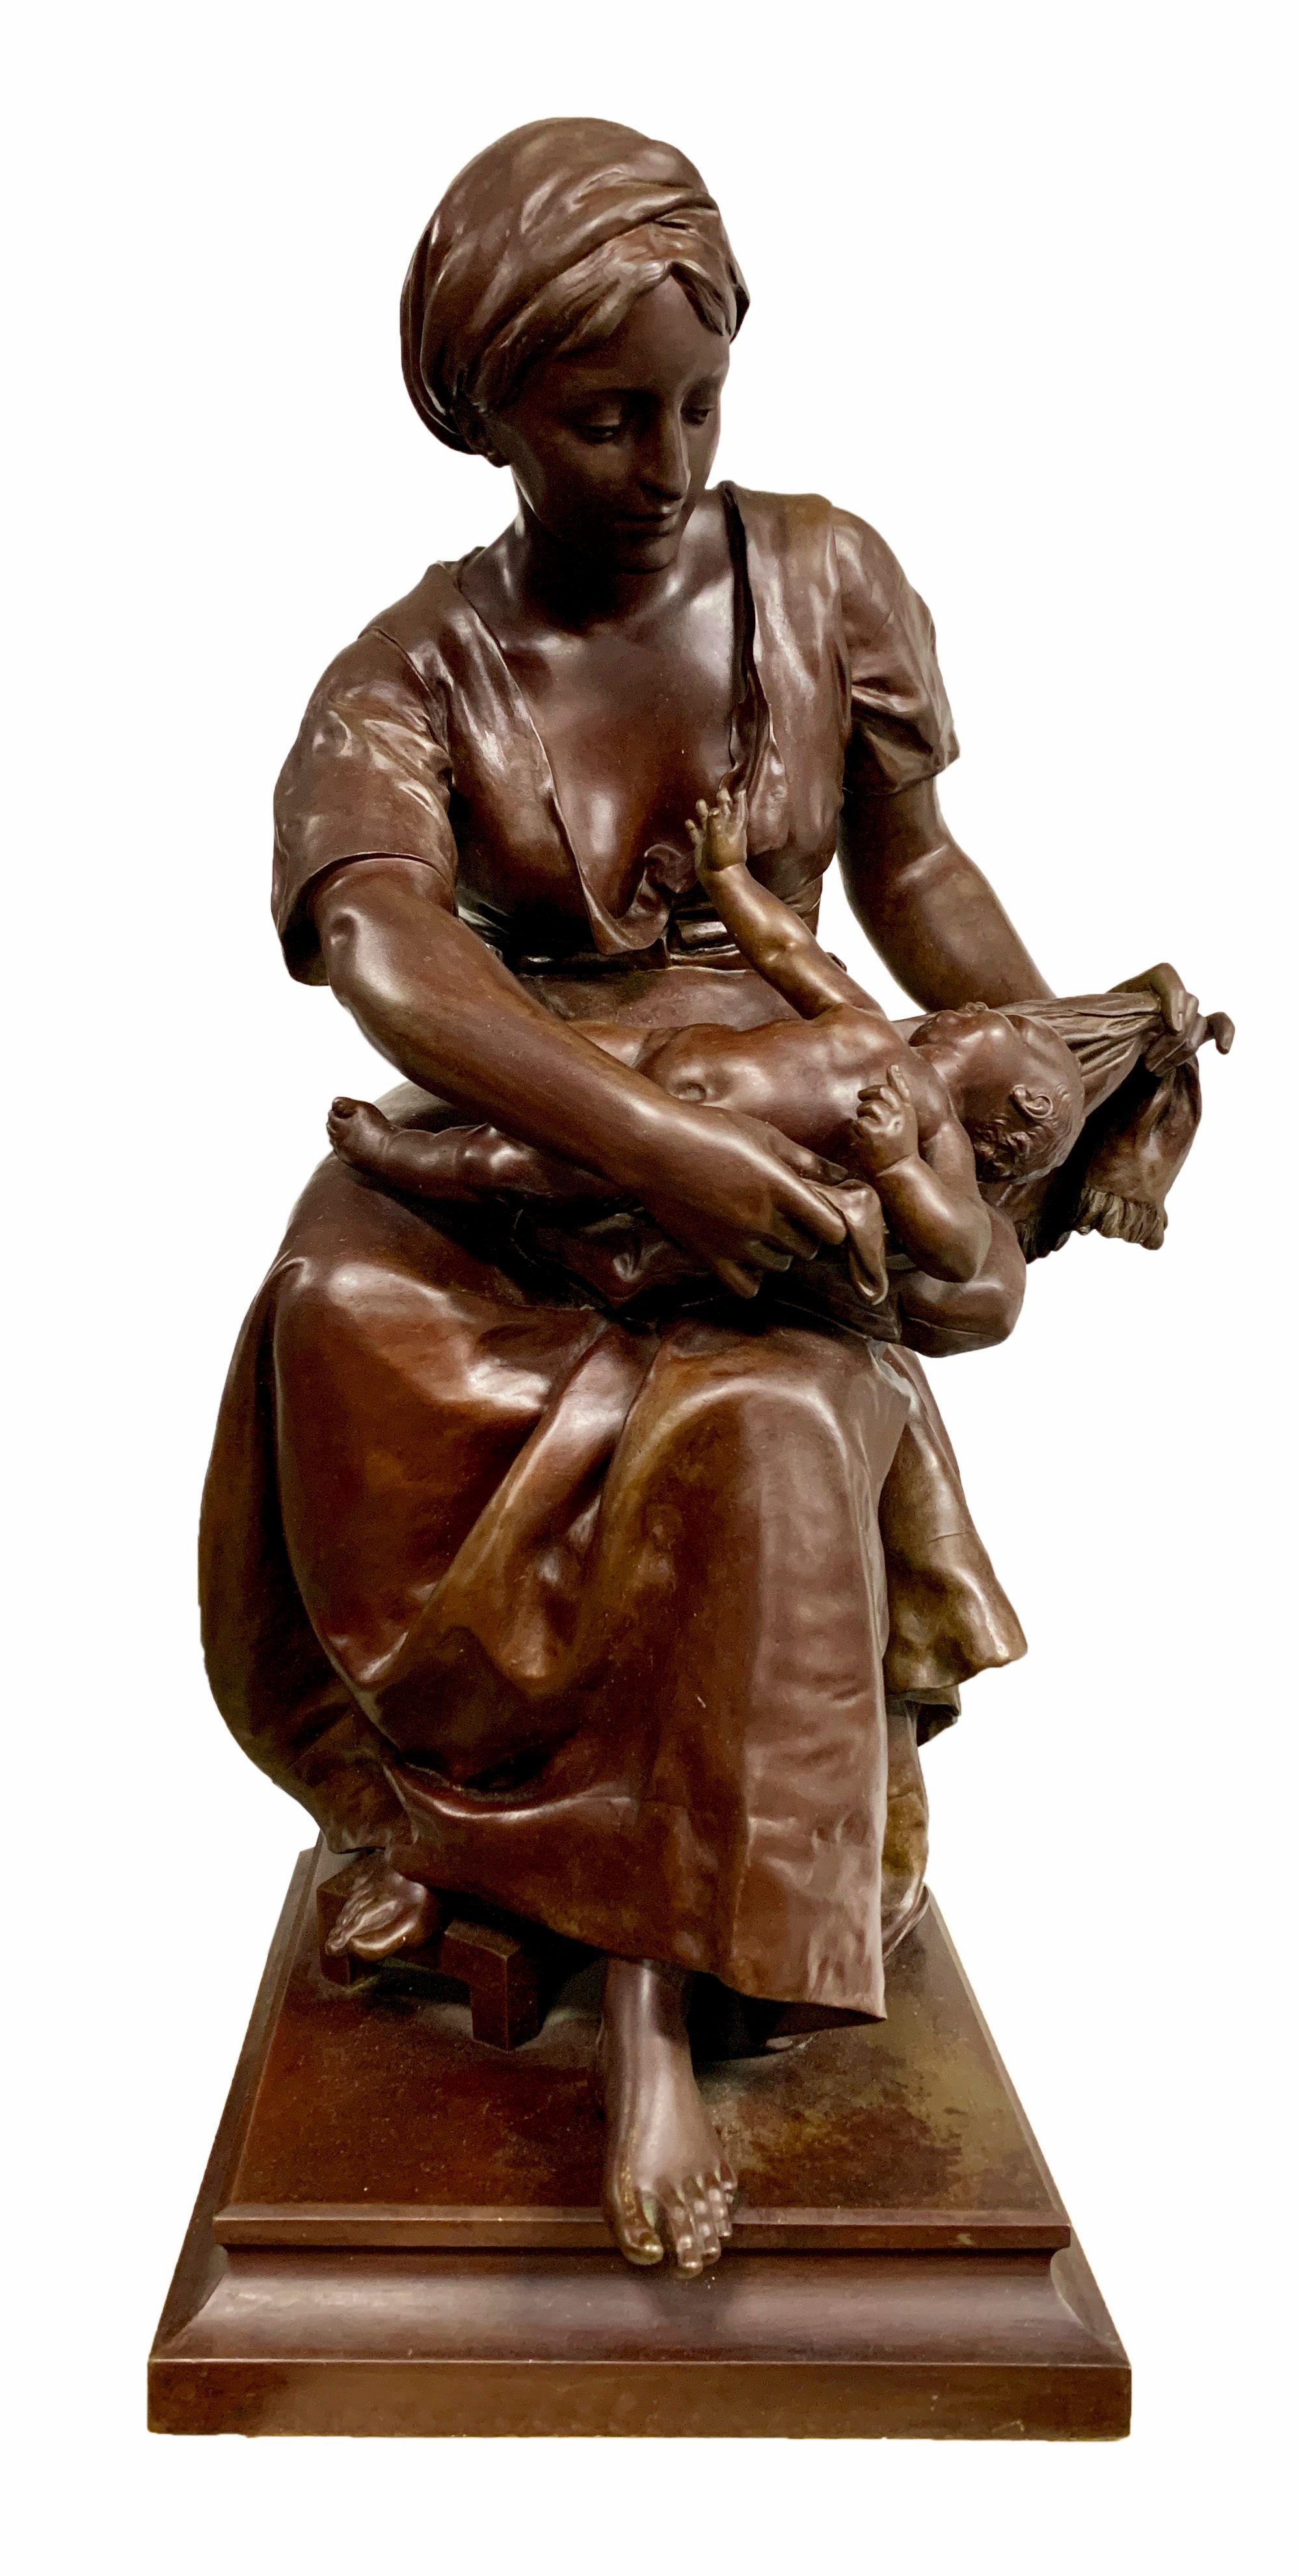 Pierre Louis Détrier (French, 1822–1897)
This fine patinated bronze sculpture by Detrier depicts a mother and child. The attention to detail can be seen in the delicate treatment of the clothes and the expression of the mother. The baby is seen